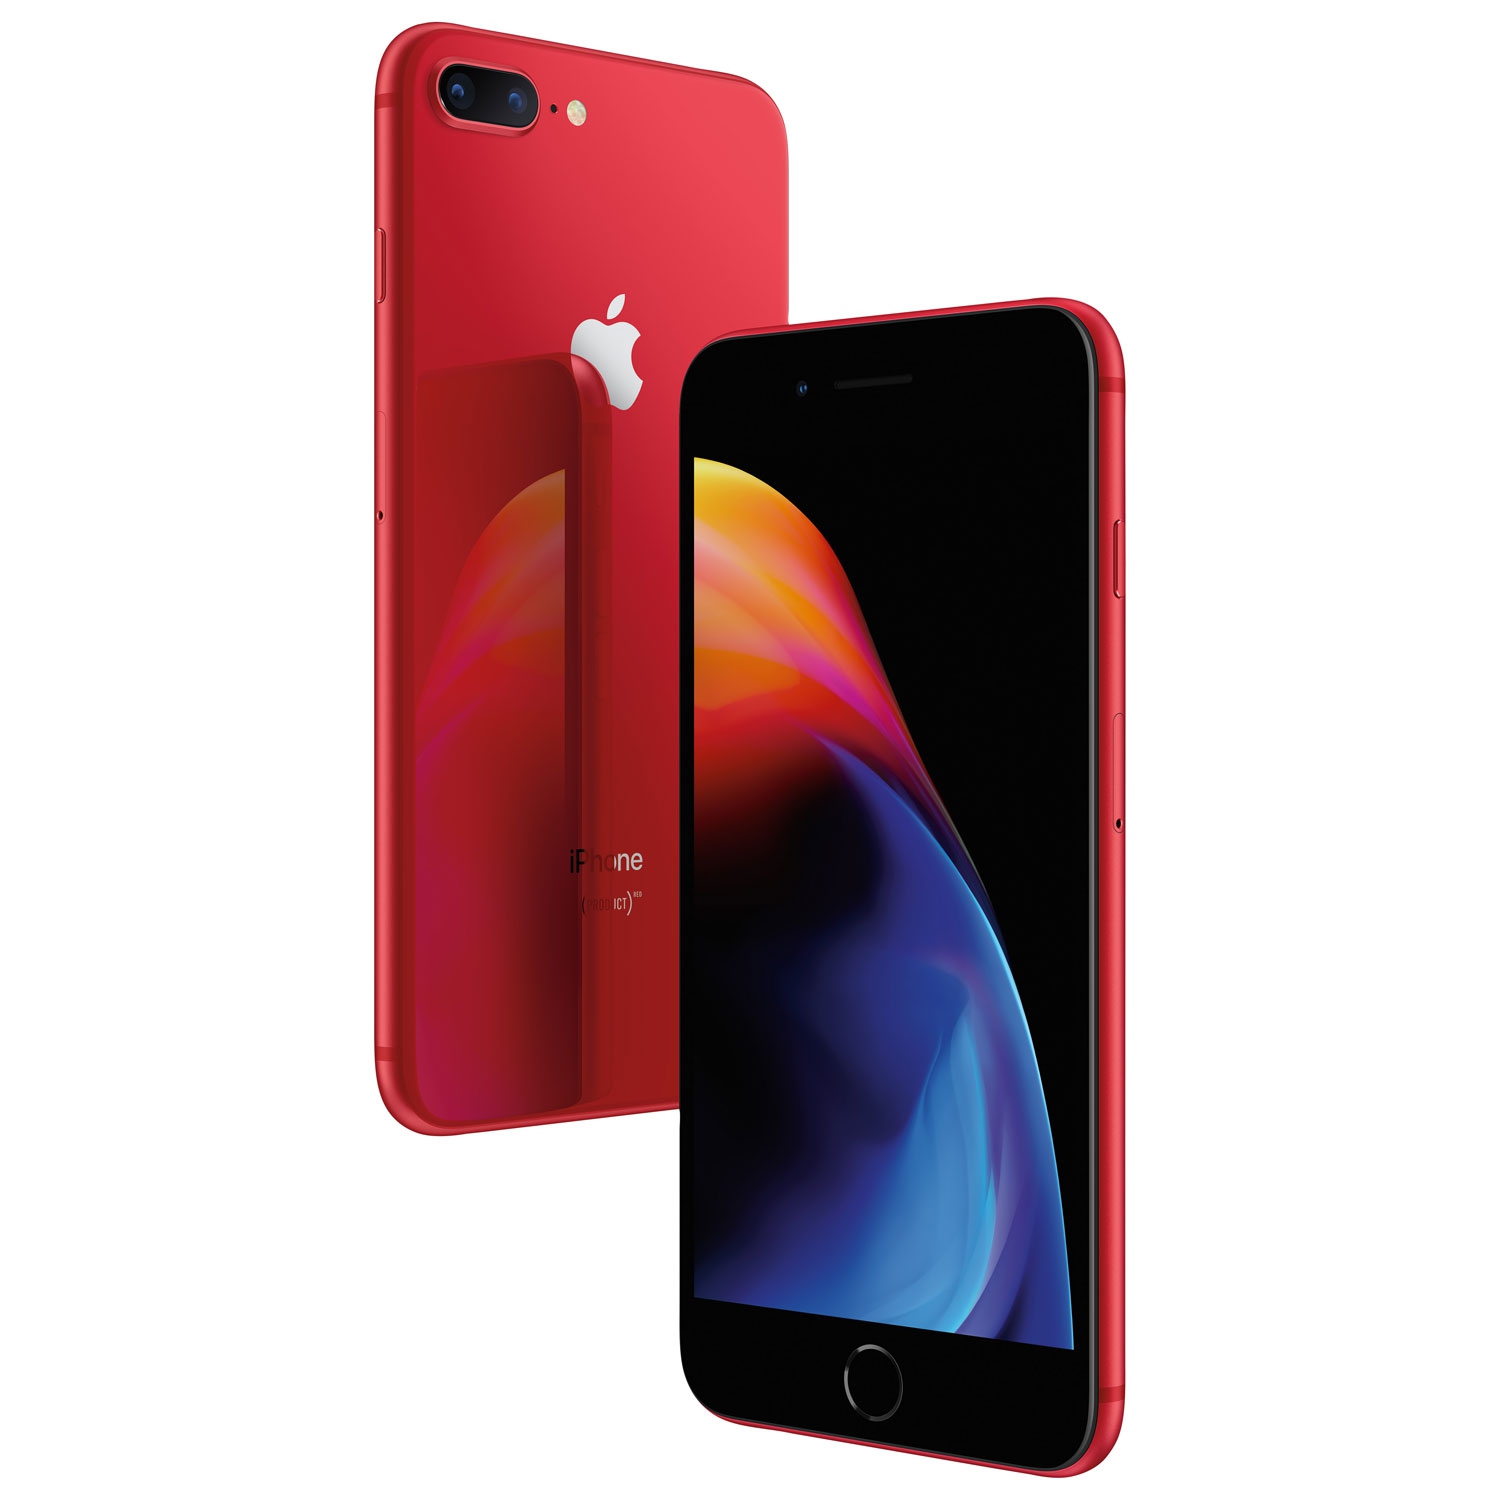 Apple iPhone 8 Plus 64GB Smartphone - (Product)RED - Unlocked - Open Box